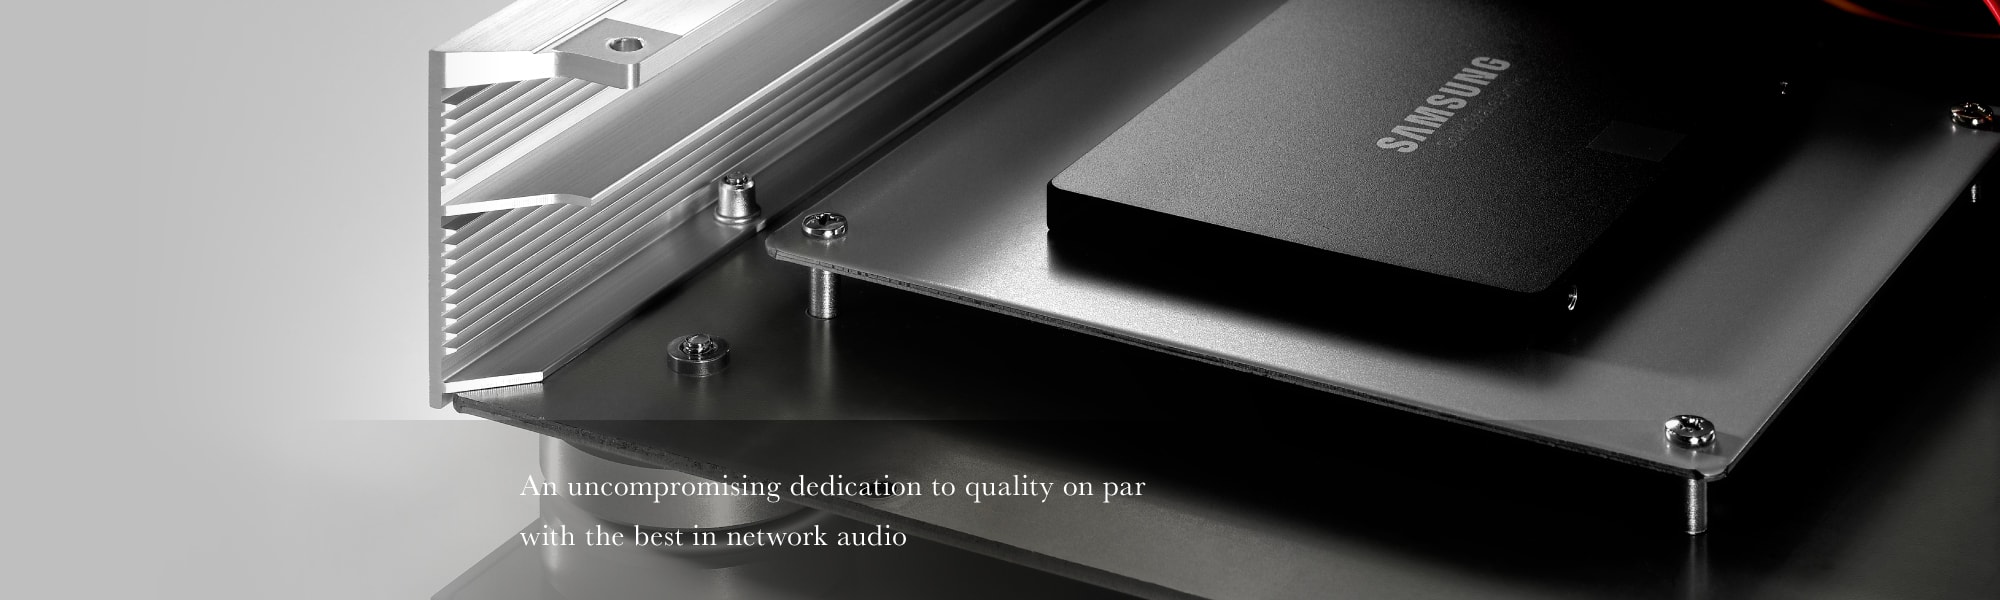 An uncompromising dedication to quality on par with the best in network audio